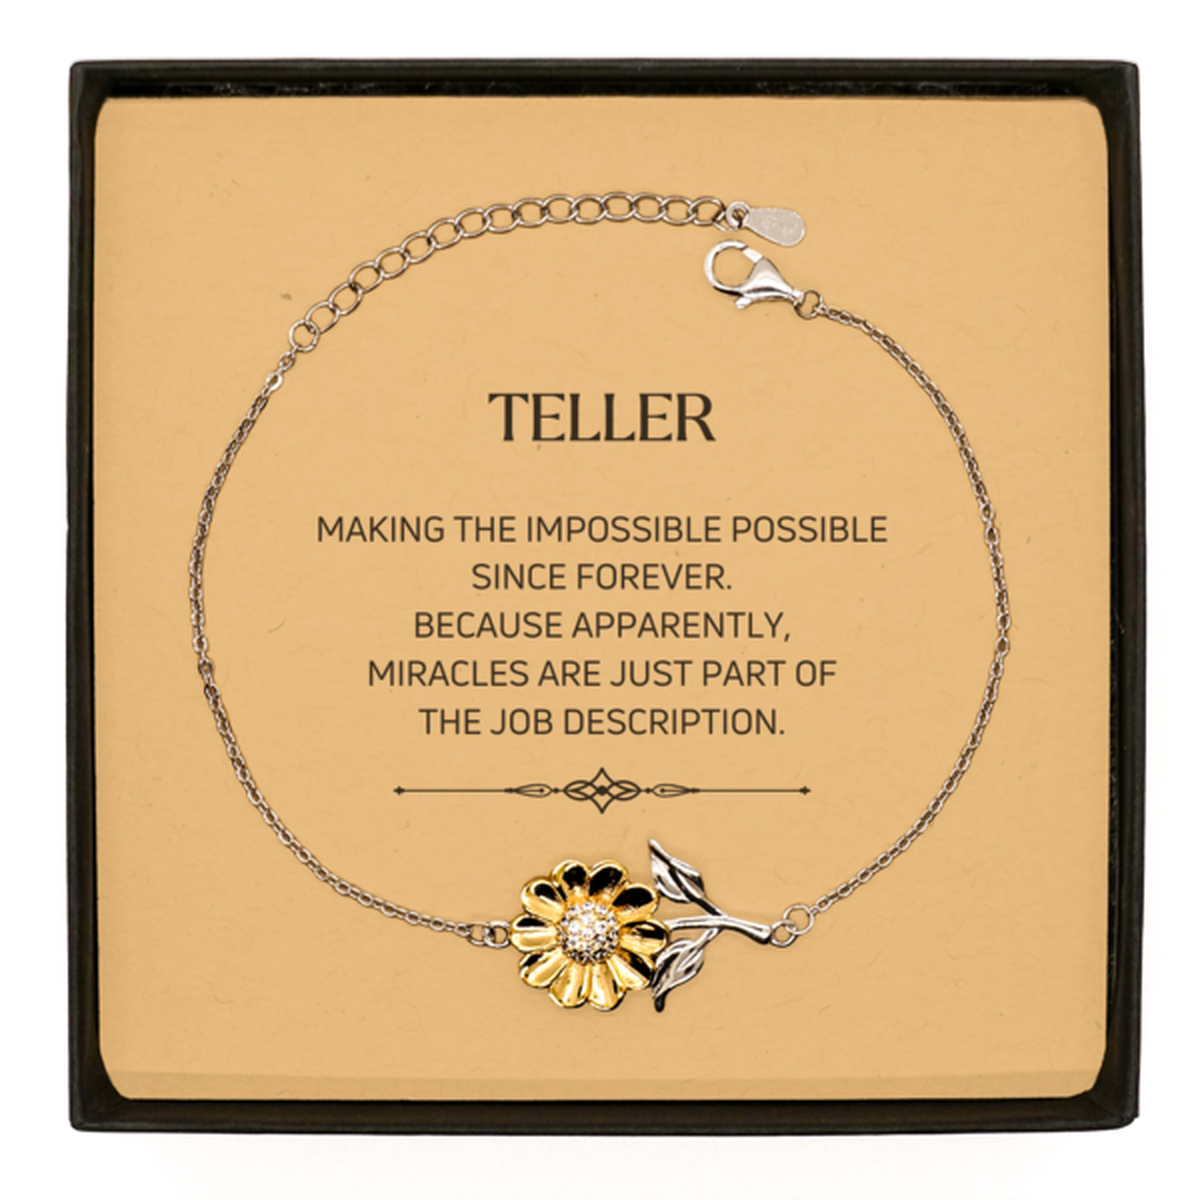 Funny Teller Gifts, Miracles are just part of the job description, Inspirational Birthday Sunflower Bracelet For Teller, Men, Women, Coworkers, Friends, Boss